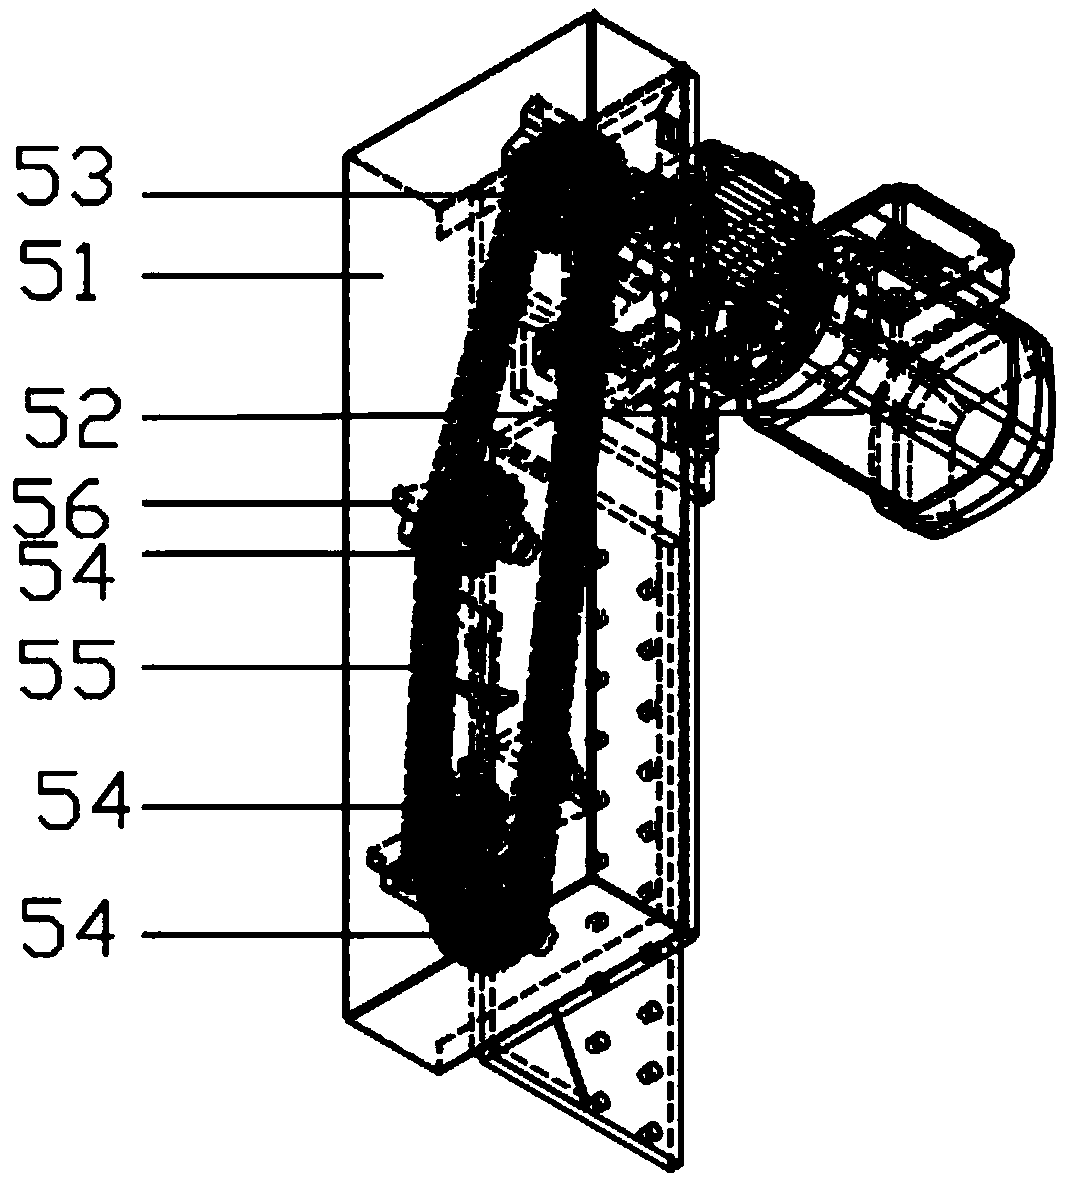 Tray sorting equipment for material sorting and sorting method thereof